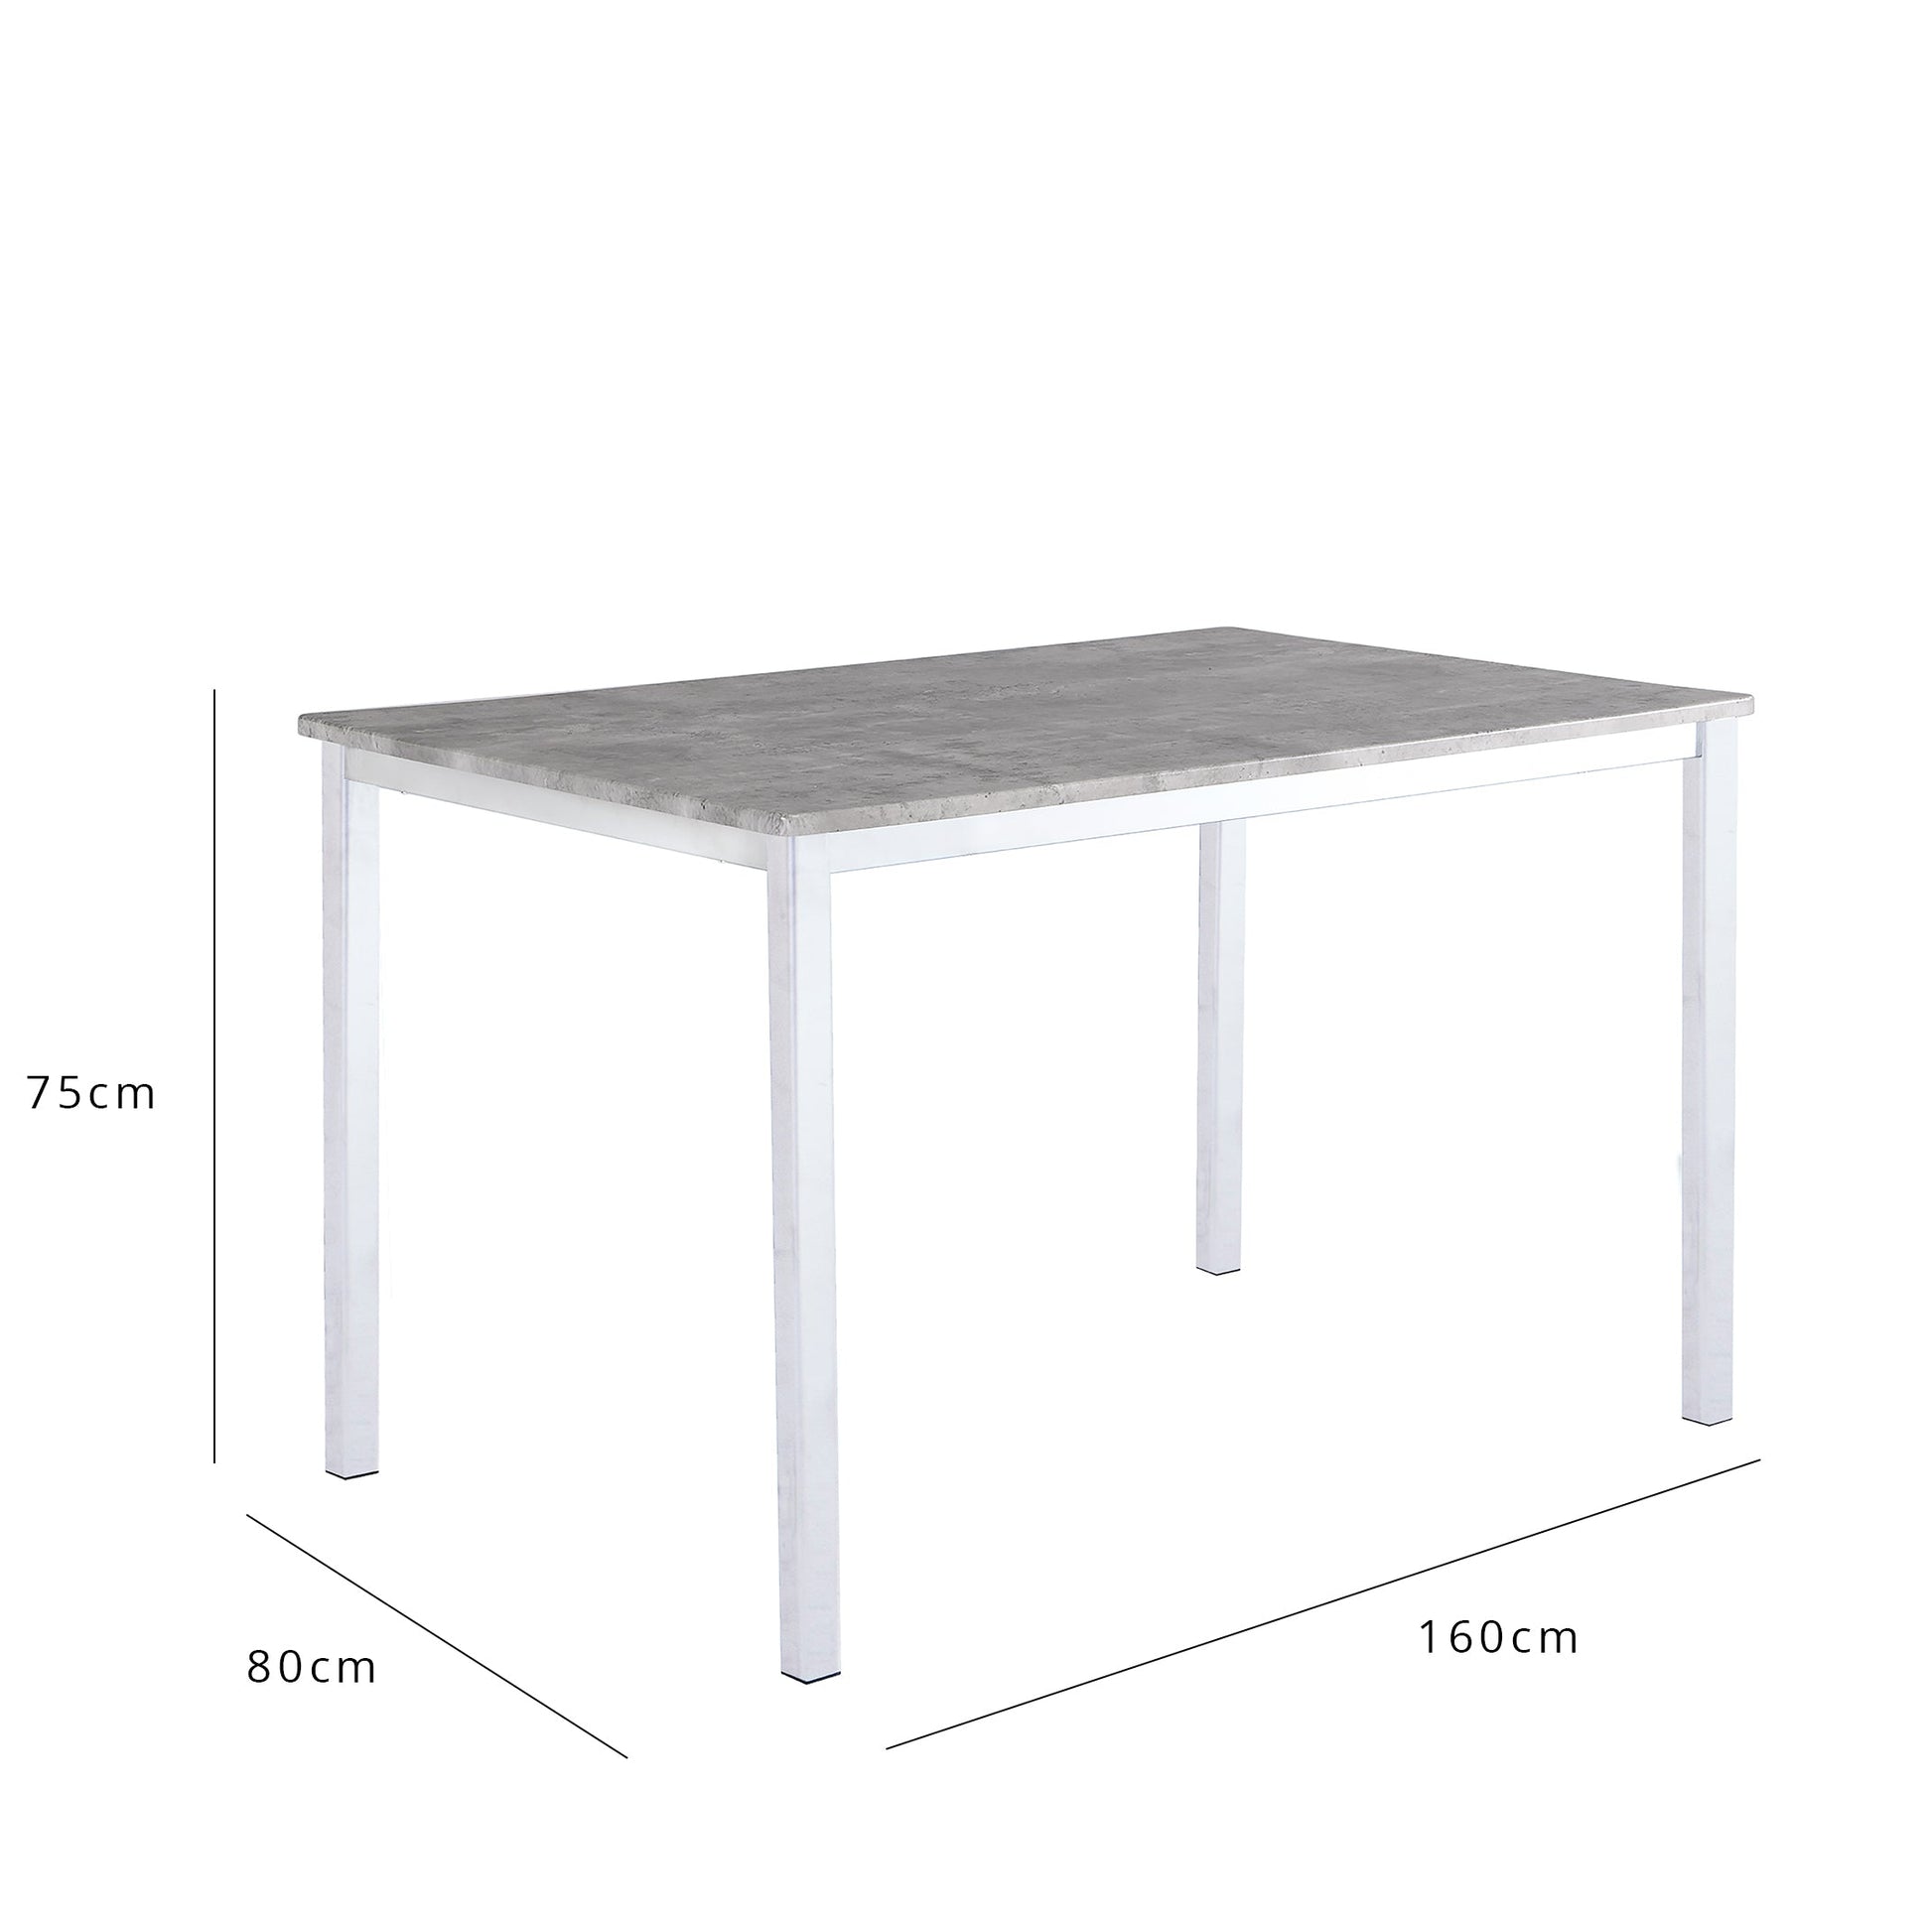 Milo dining table - 6 seater - concrete effect and chrome - Laura James